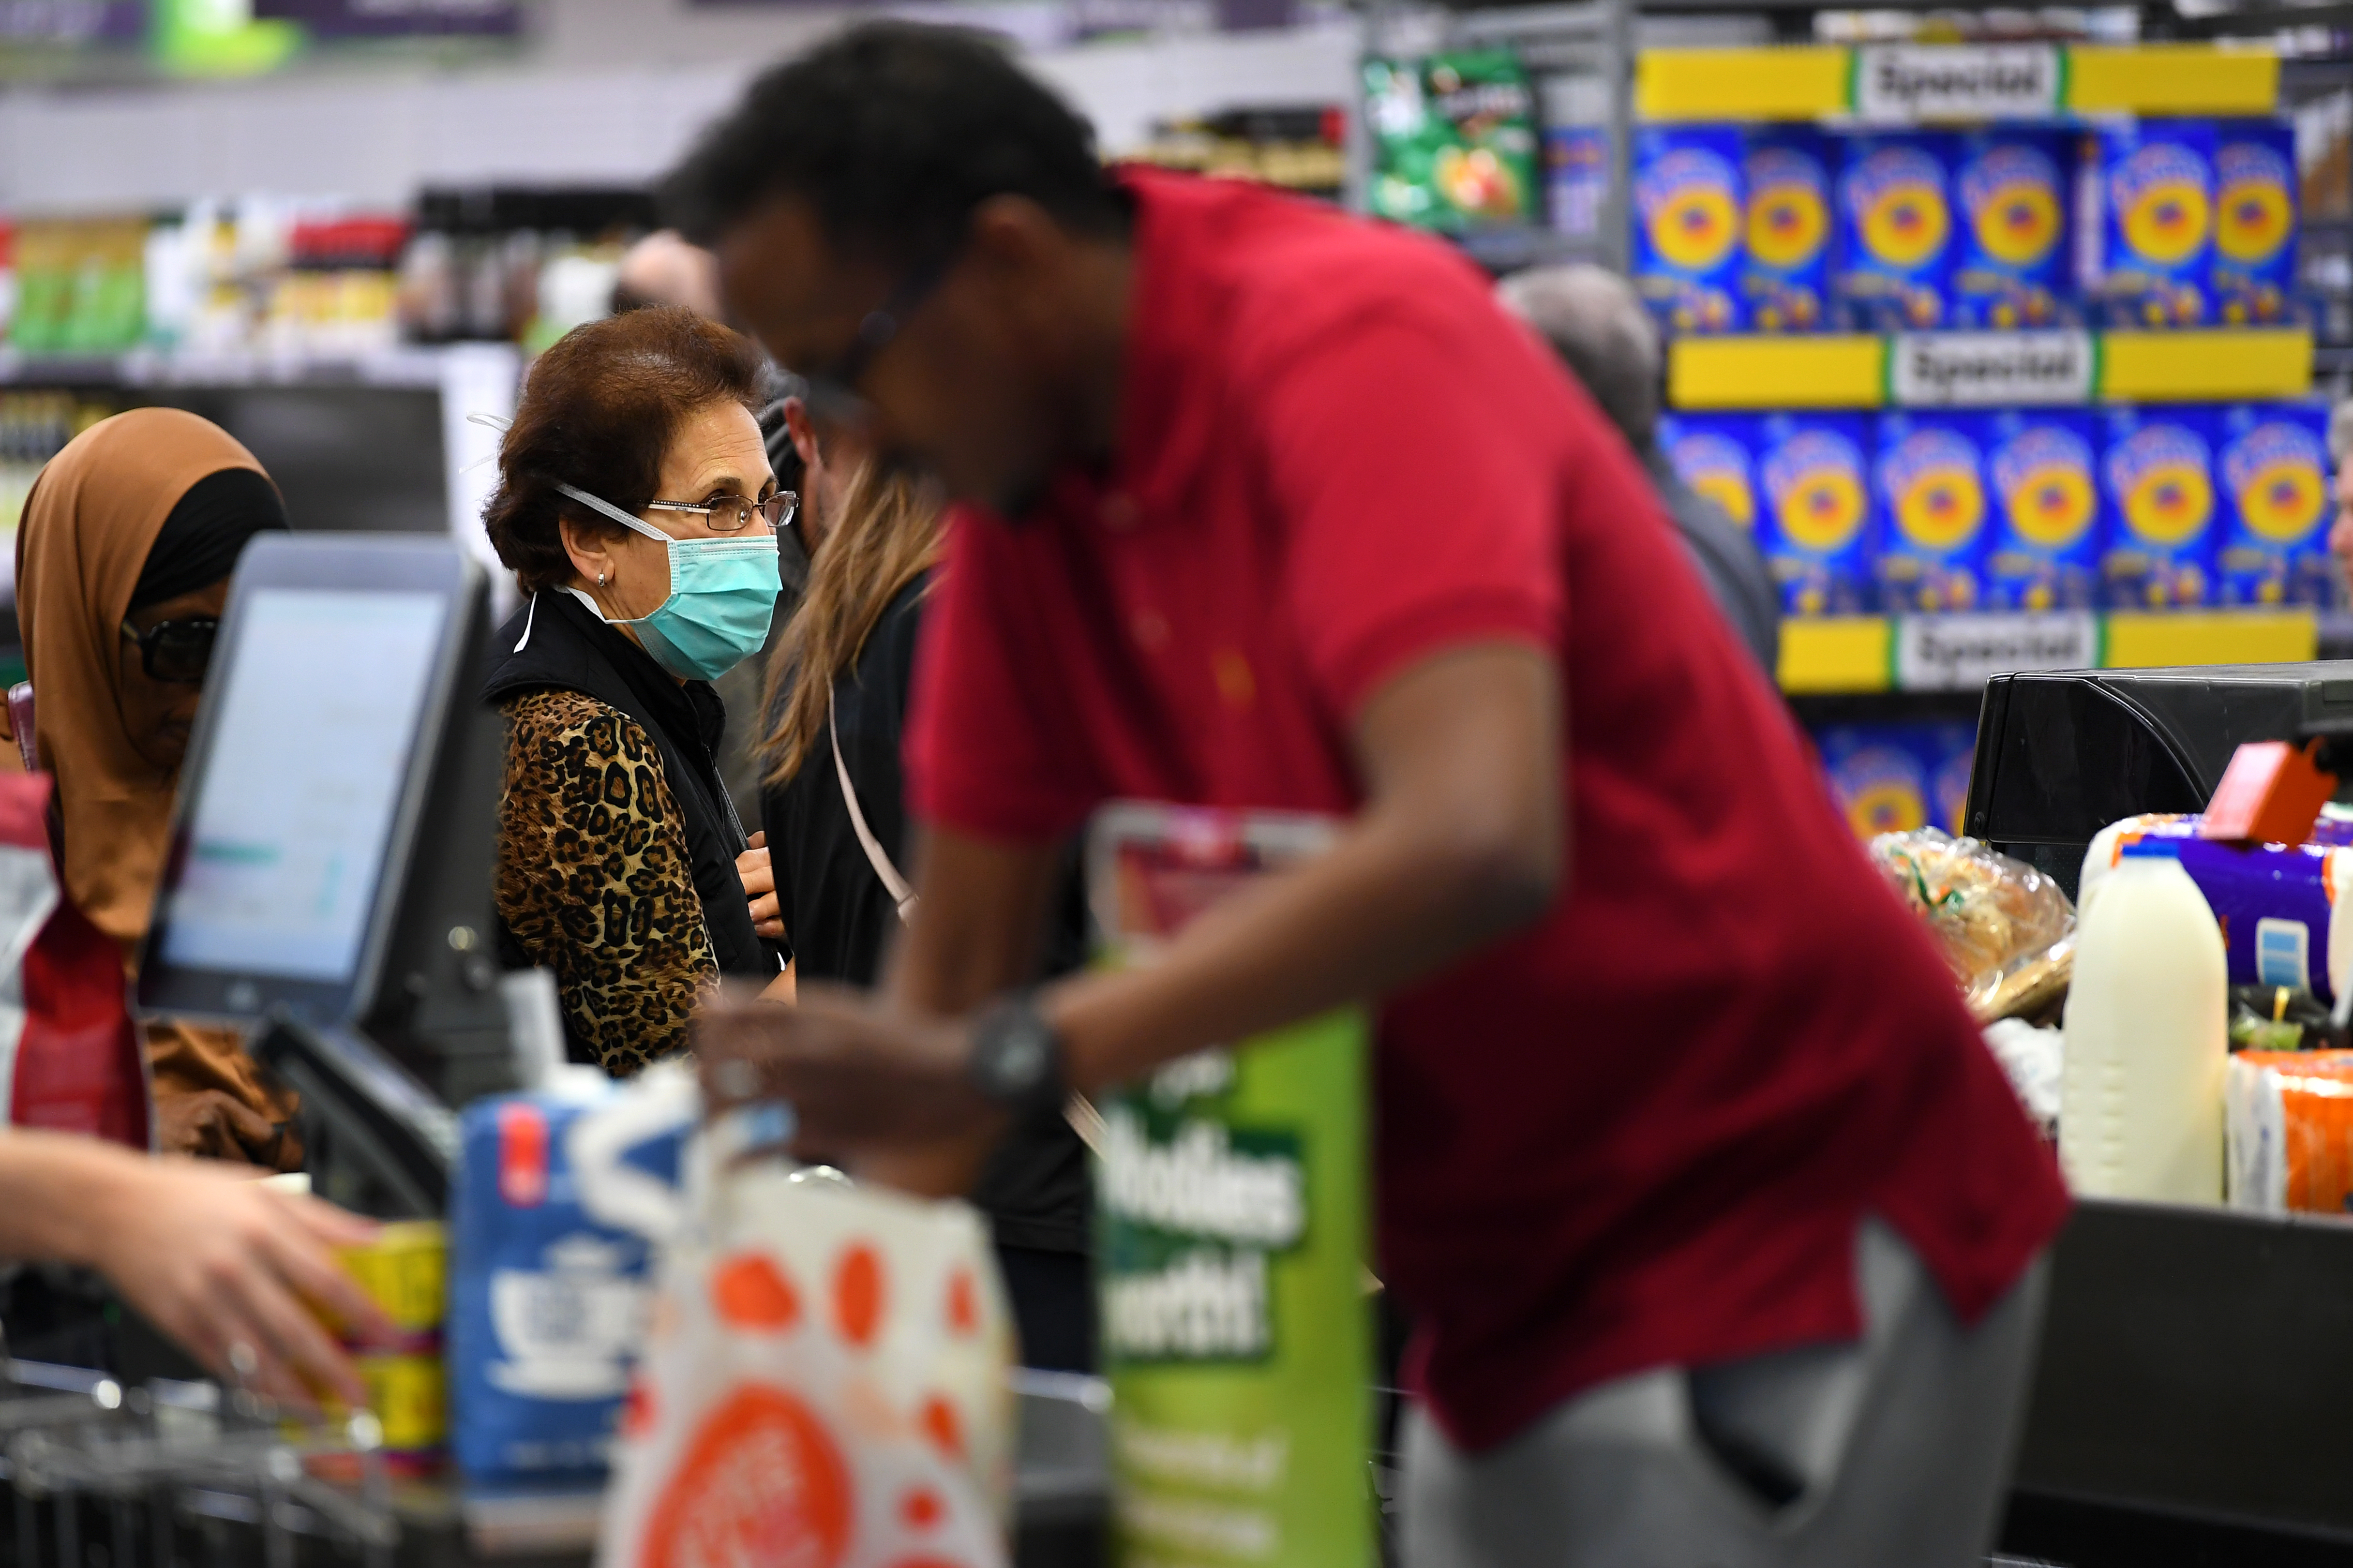 People shopping are seen in Woolworths supermarket in Coburg, Melbourne, Thursday, March 19, 2020. 